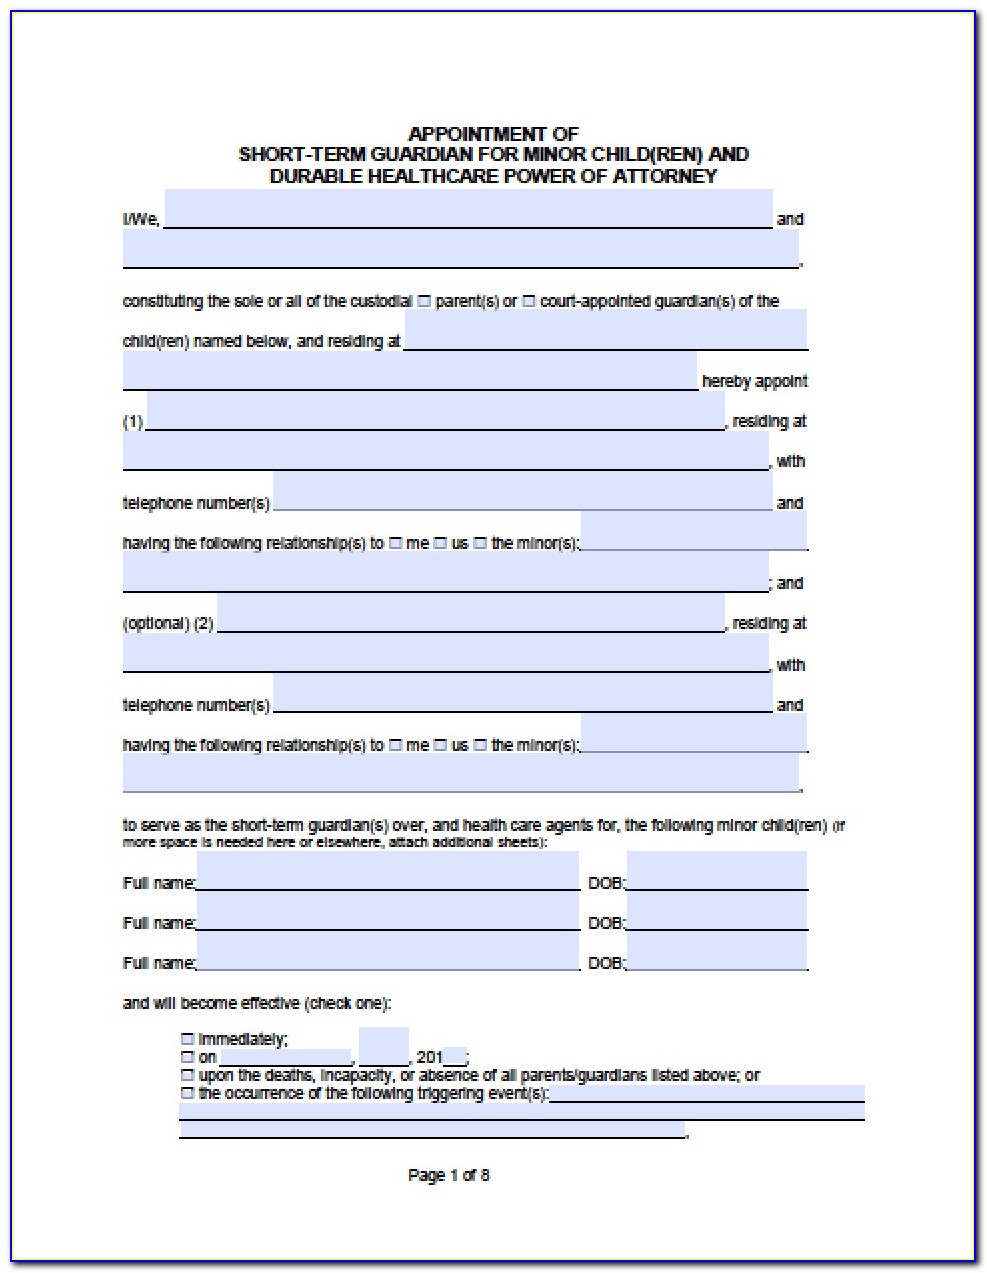 Free Printable Durable Power Of Attorney Form California